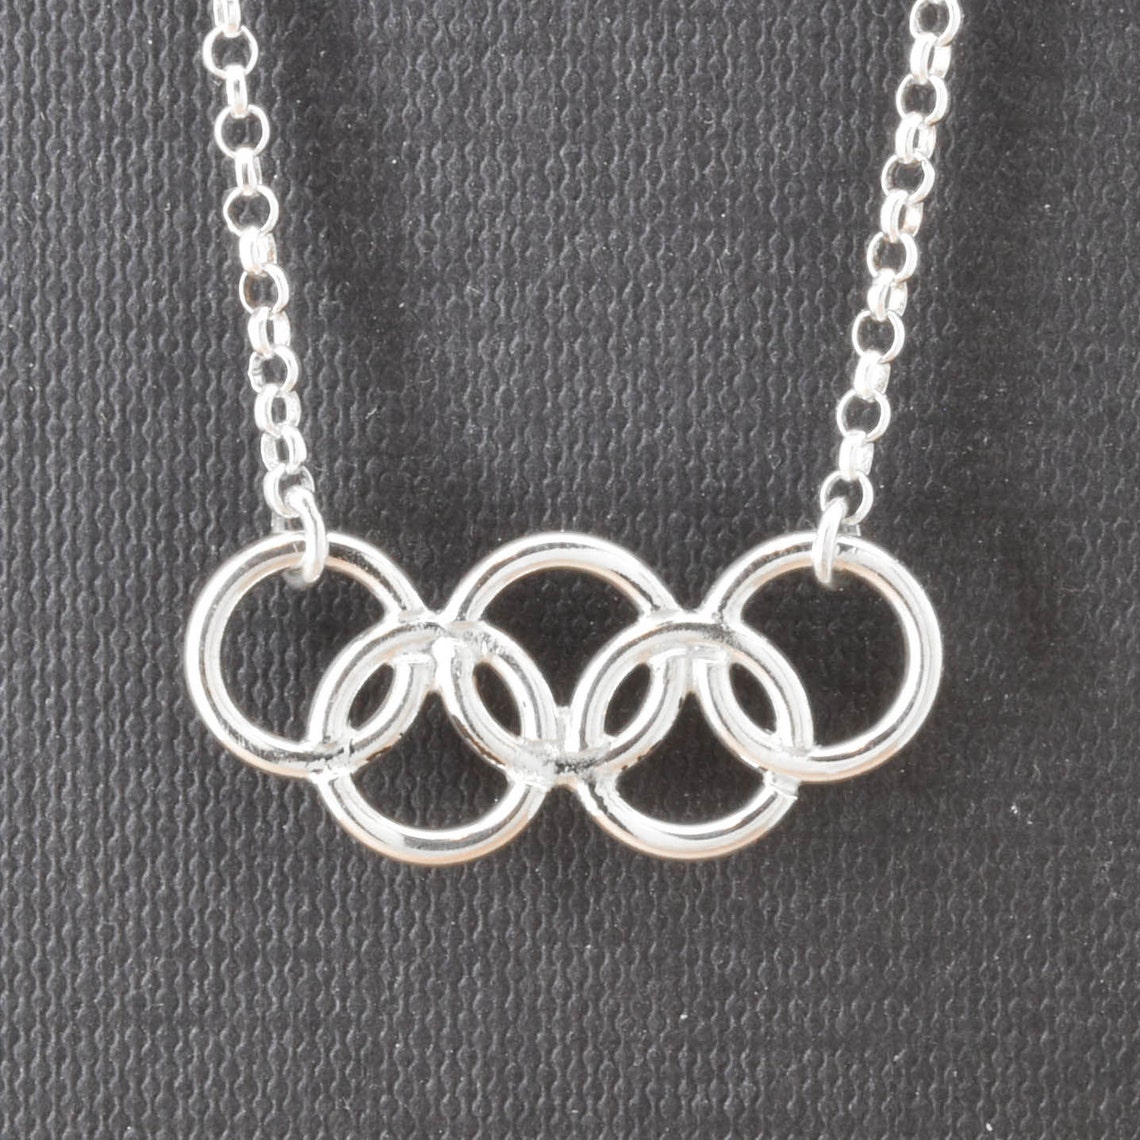 Olympic Necklace Olympic Jewelry Sterling Silver Necklace Etsy